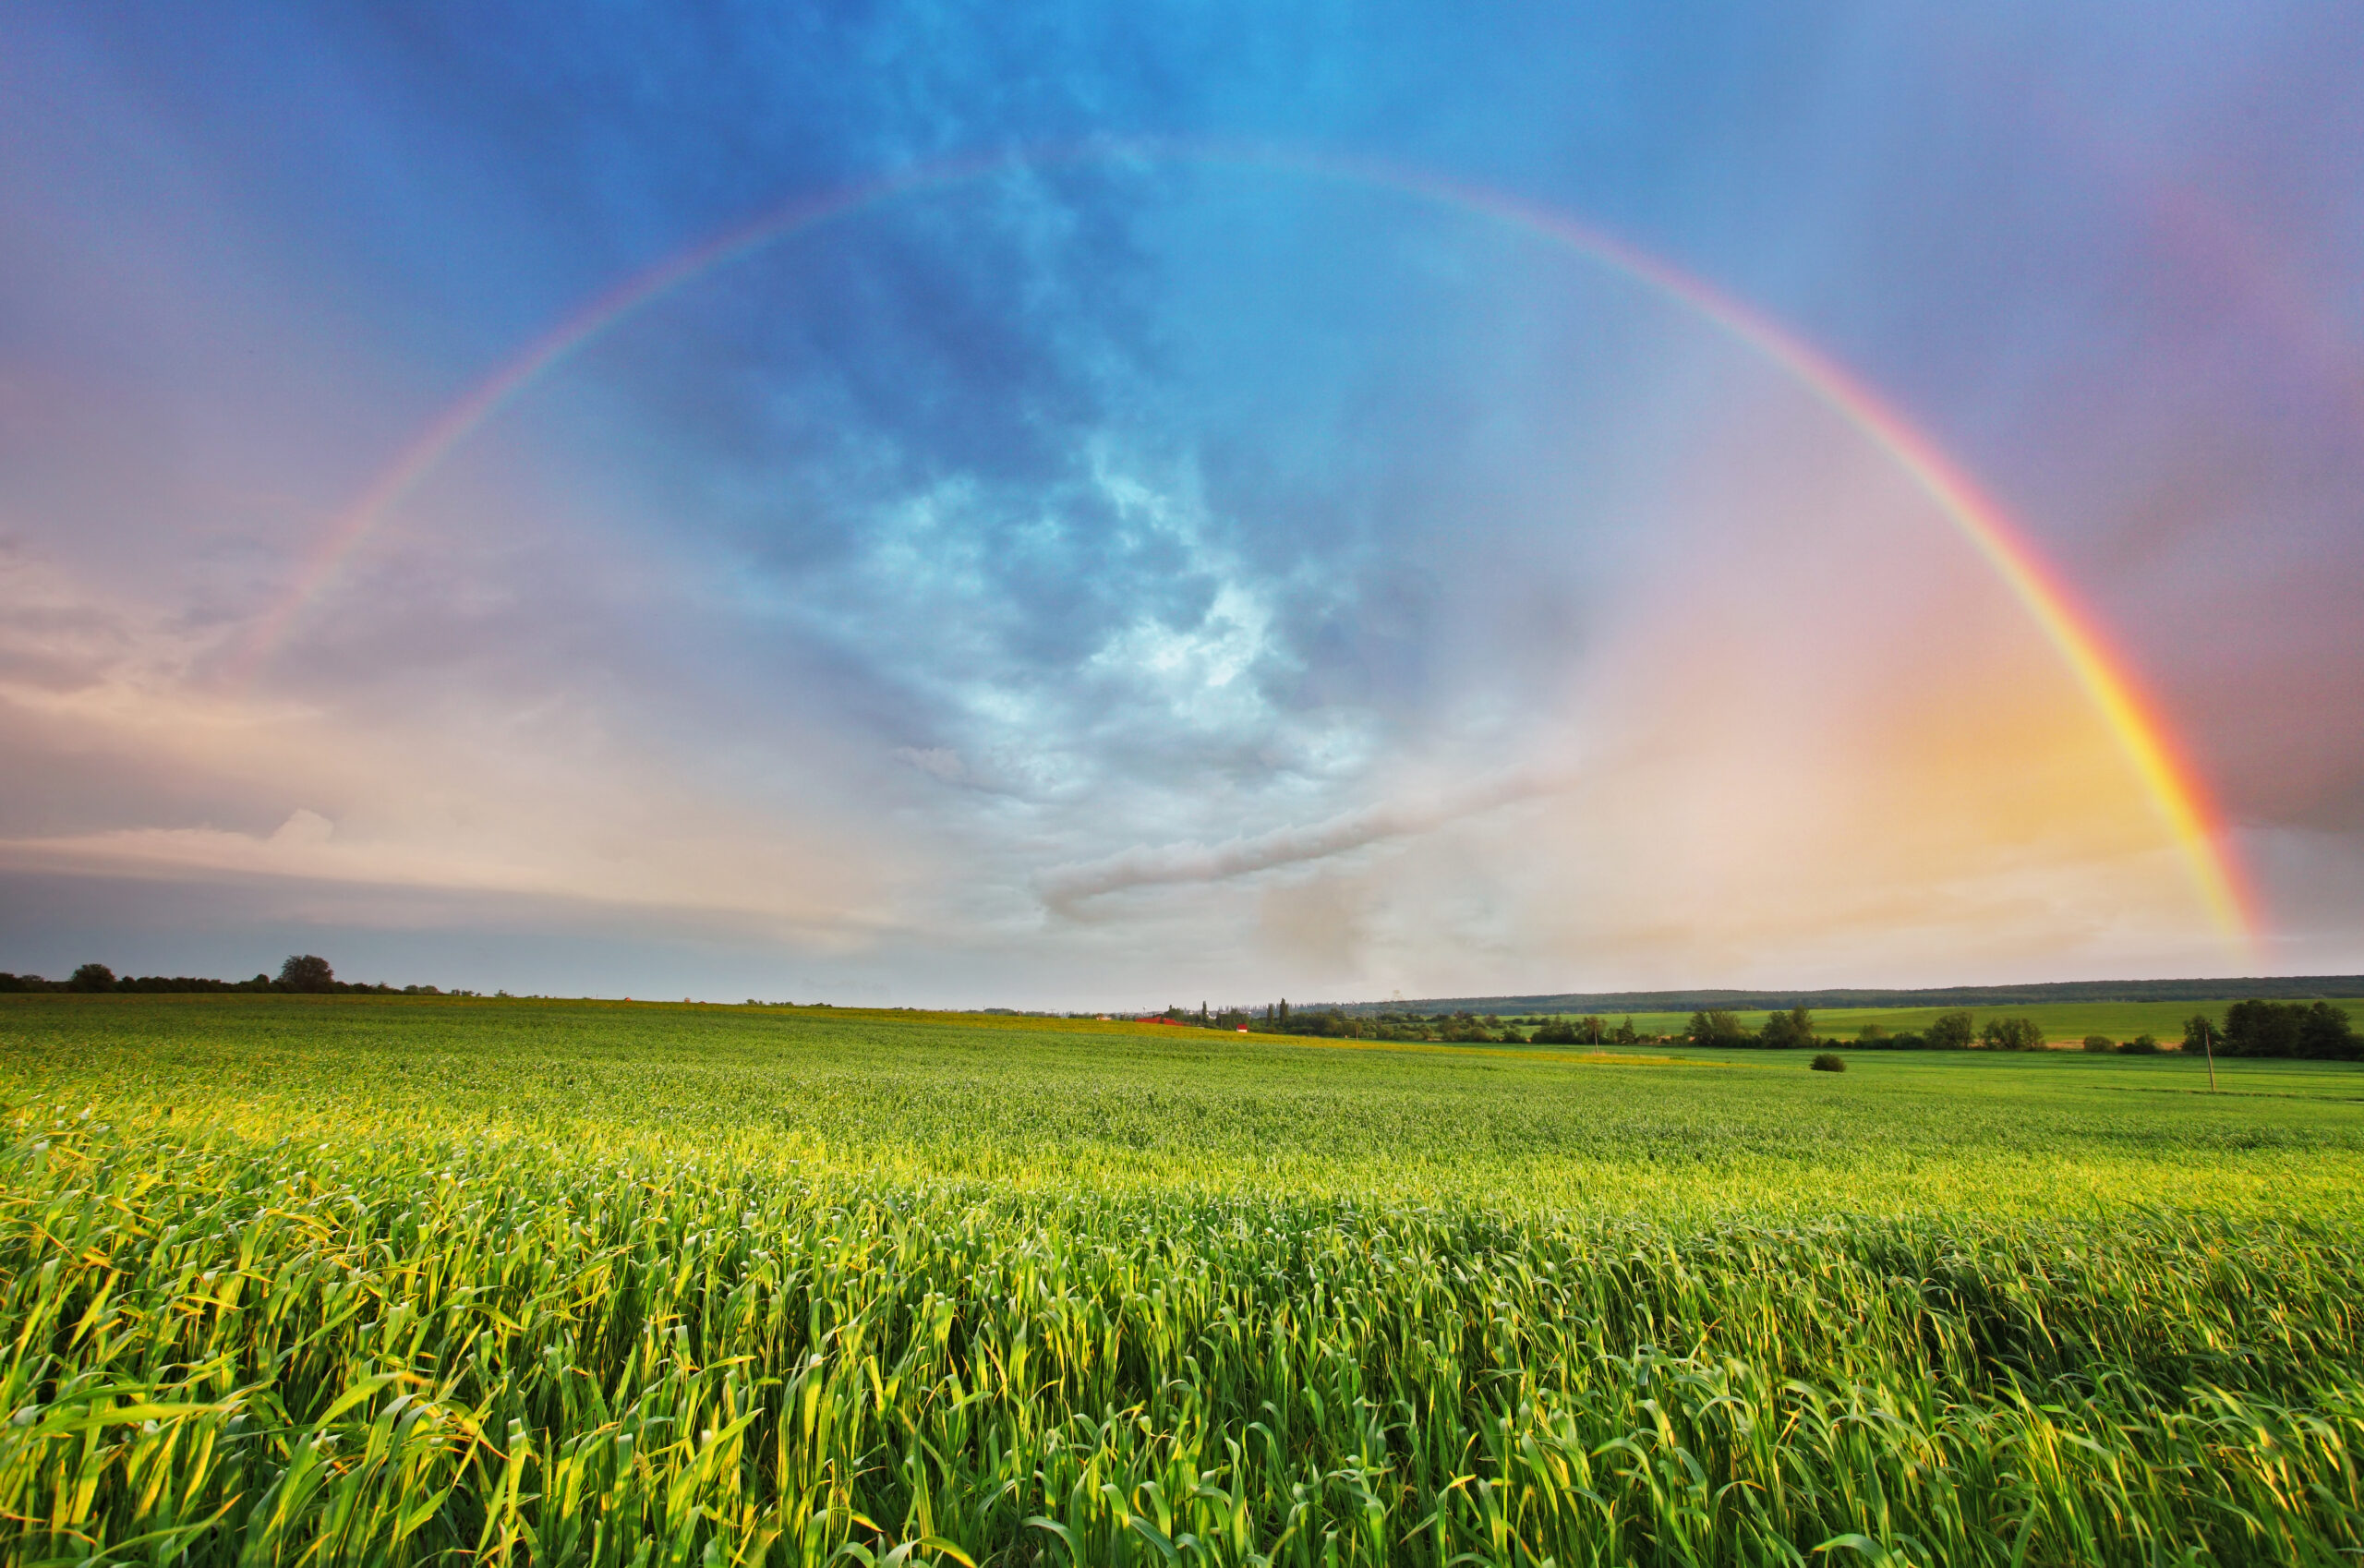 How are rainbows formed? With simple atmospheric science.